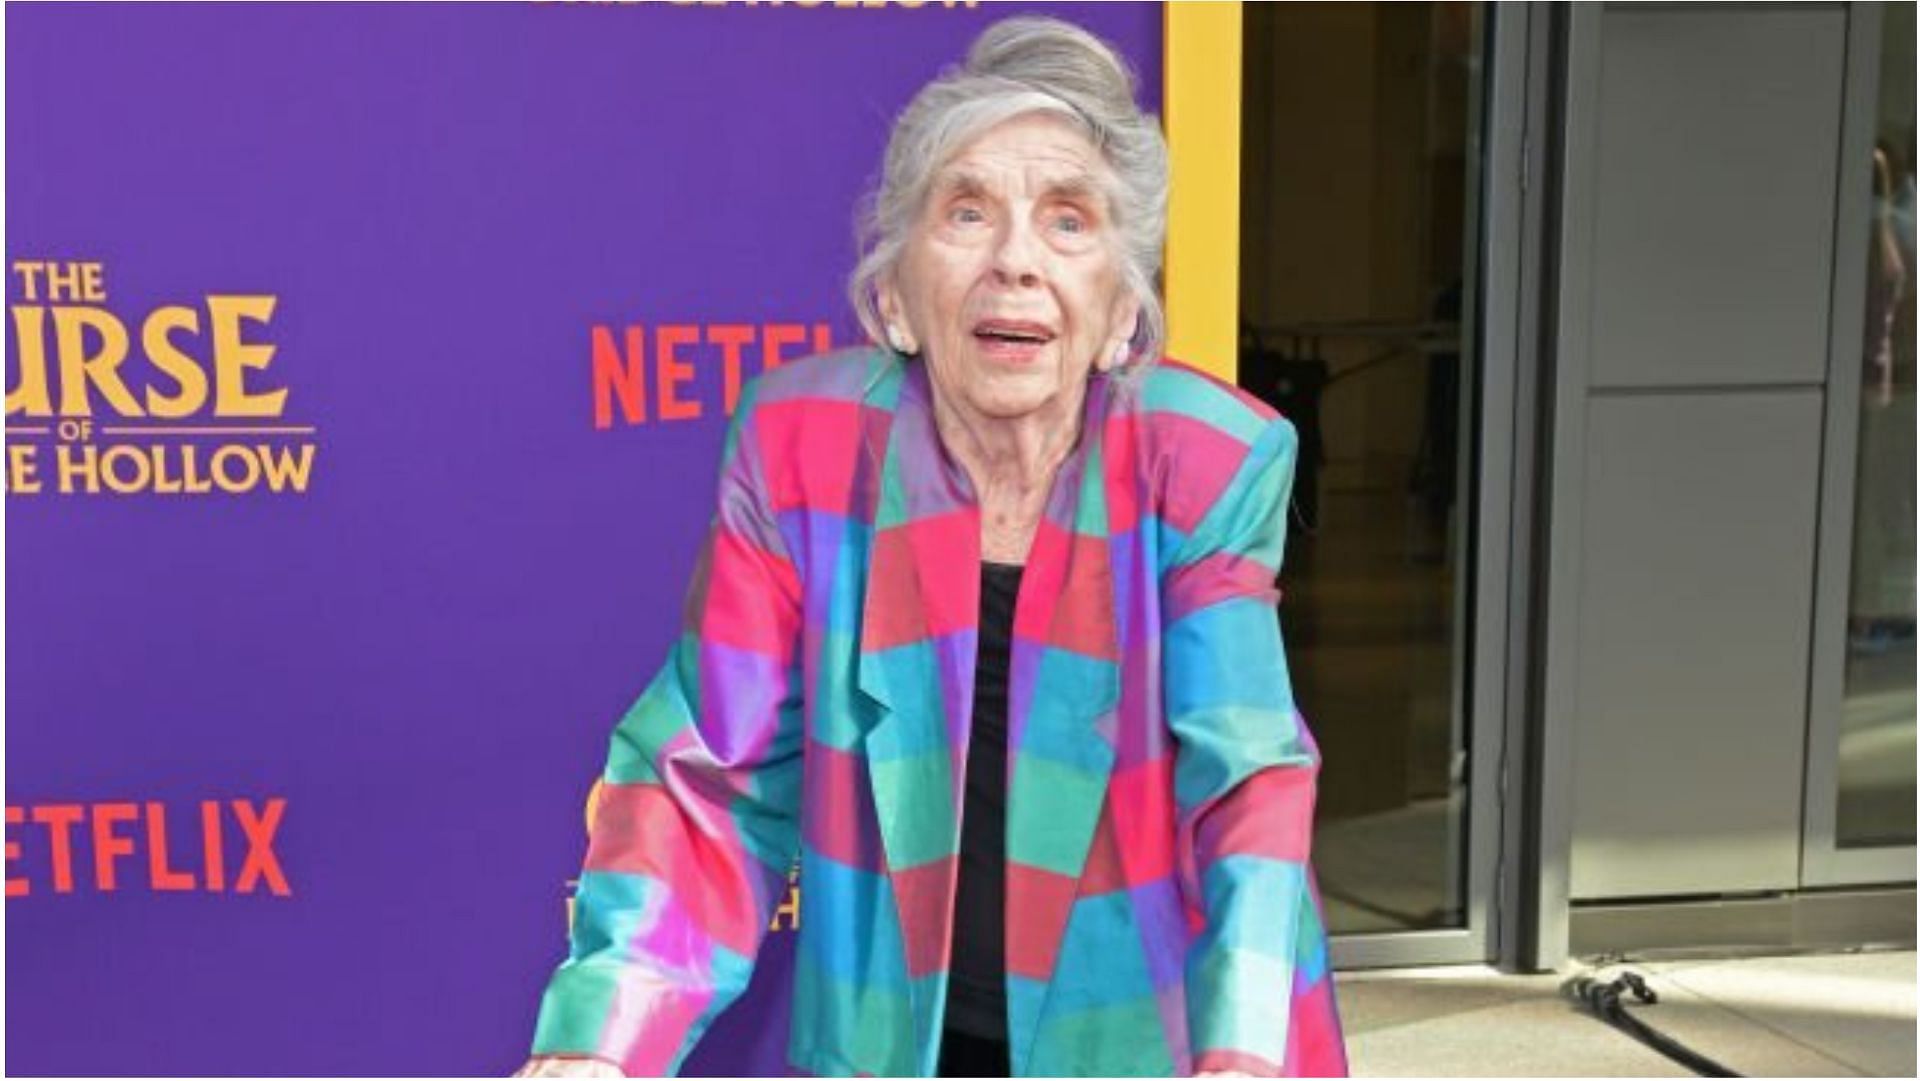 Helen Slayton-Hughes recently died at the age of 92 (Image via Michael Tullberg/Getty Images)